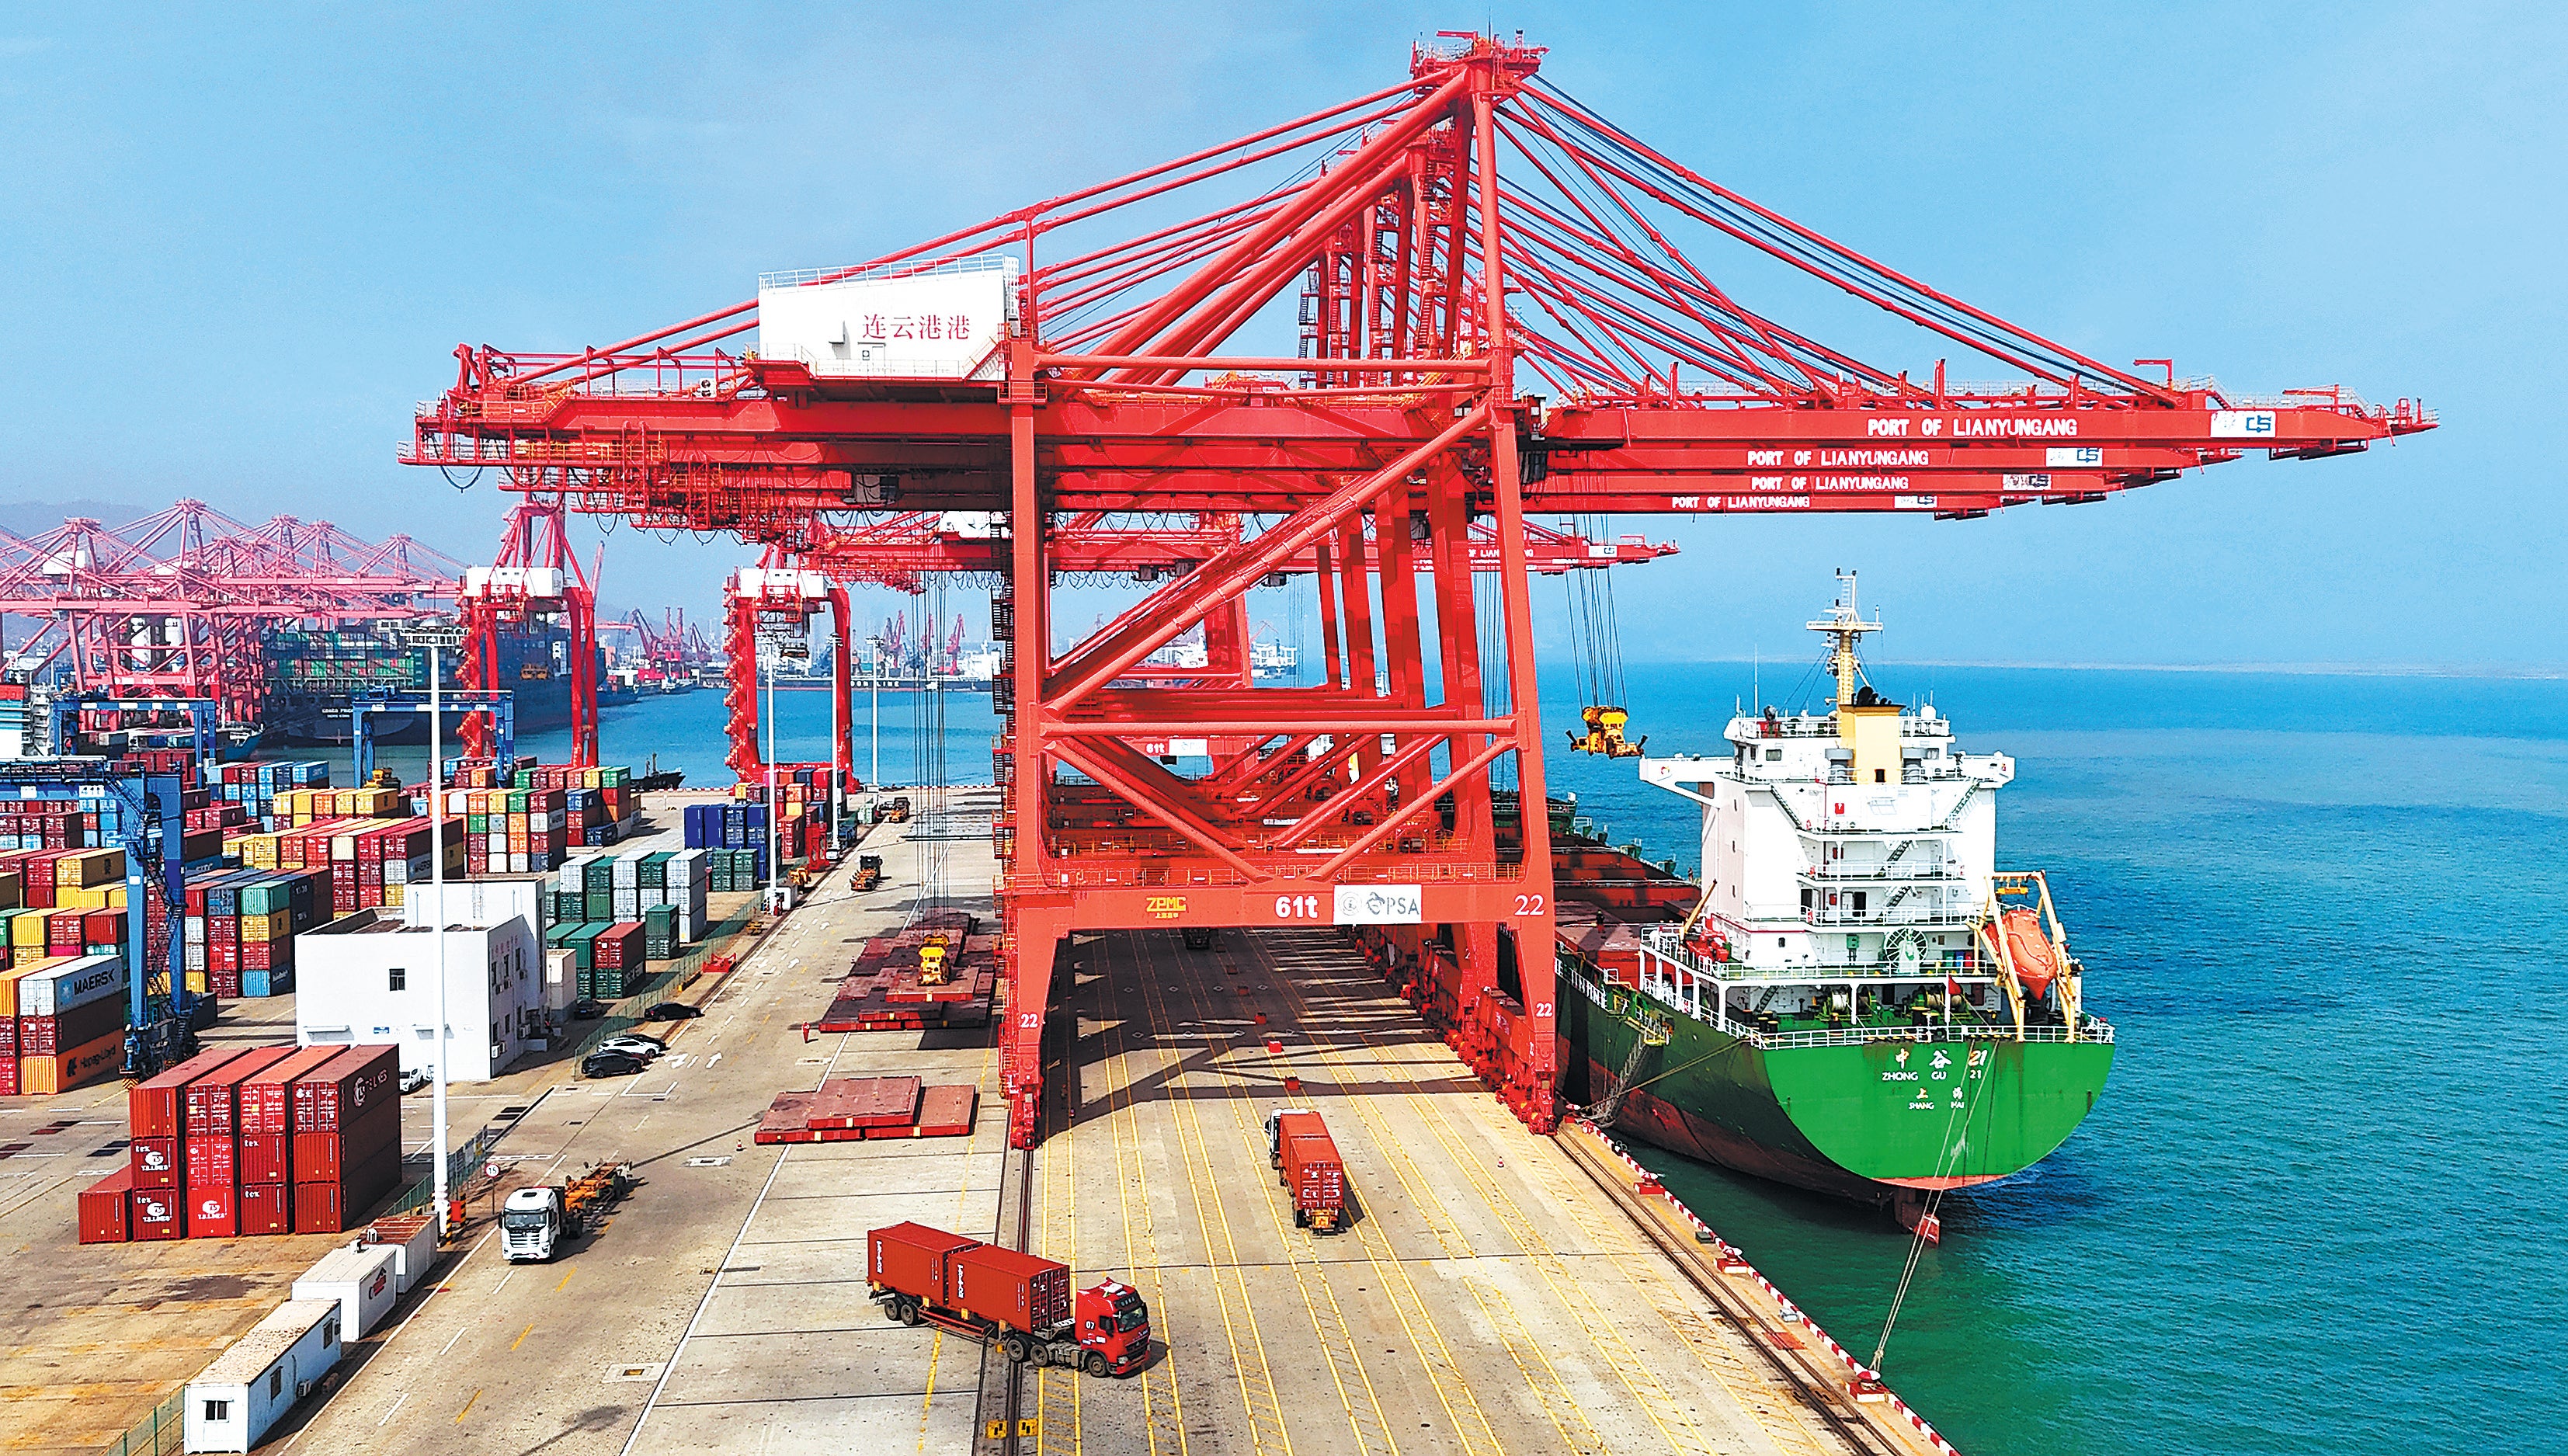 A container vessel busy loading in Lianyungang, Jiangsu province